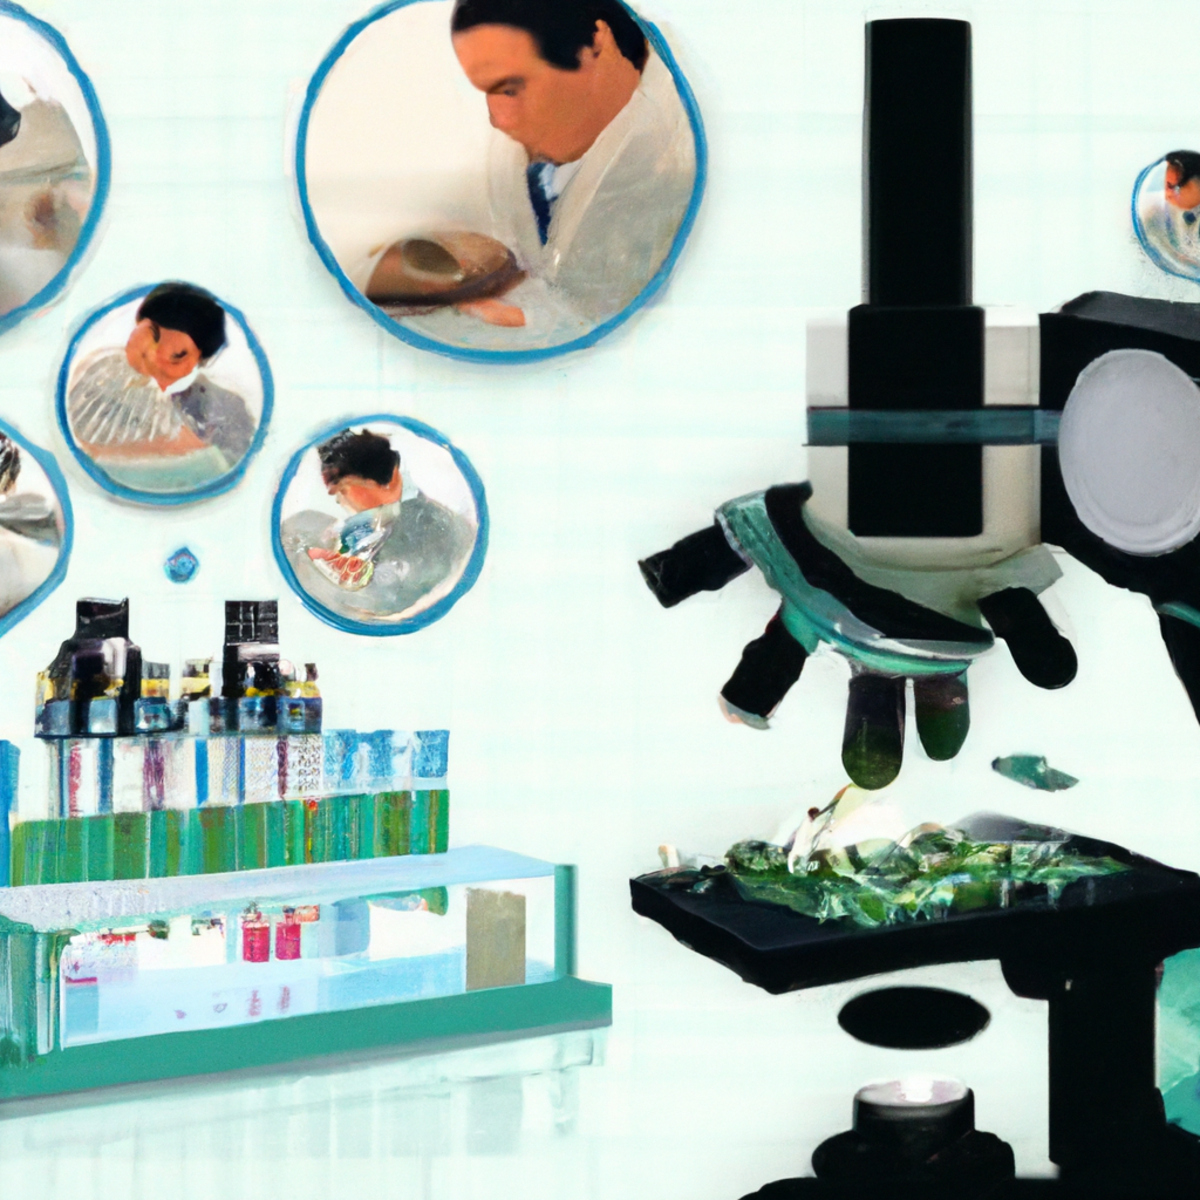 Medical laboratory with scientific equipment, emphasizing accurate diagnosis and management of Lesch-Nyhan Syndrome.